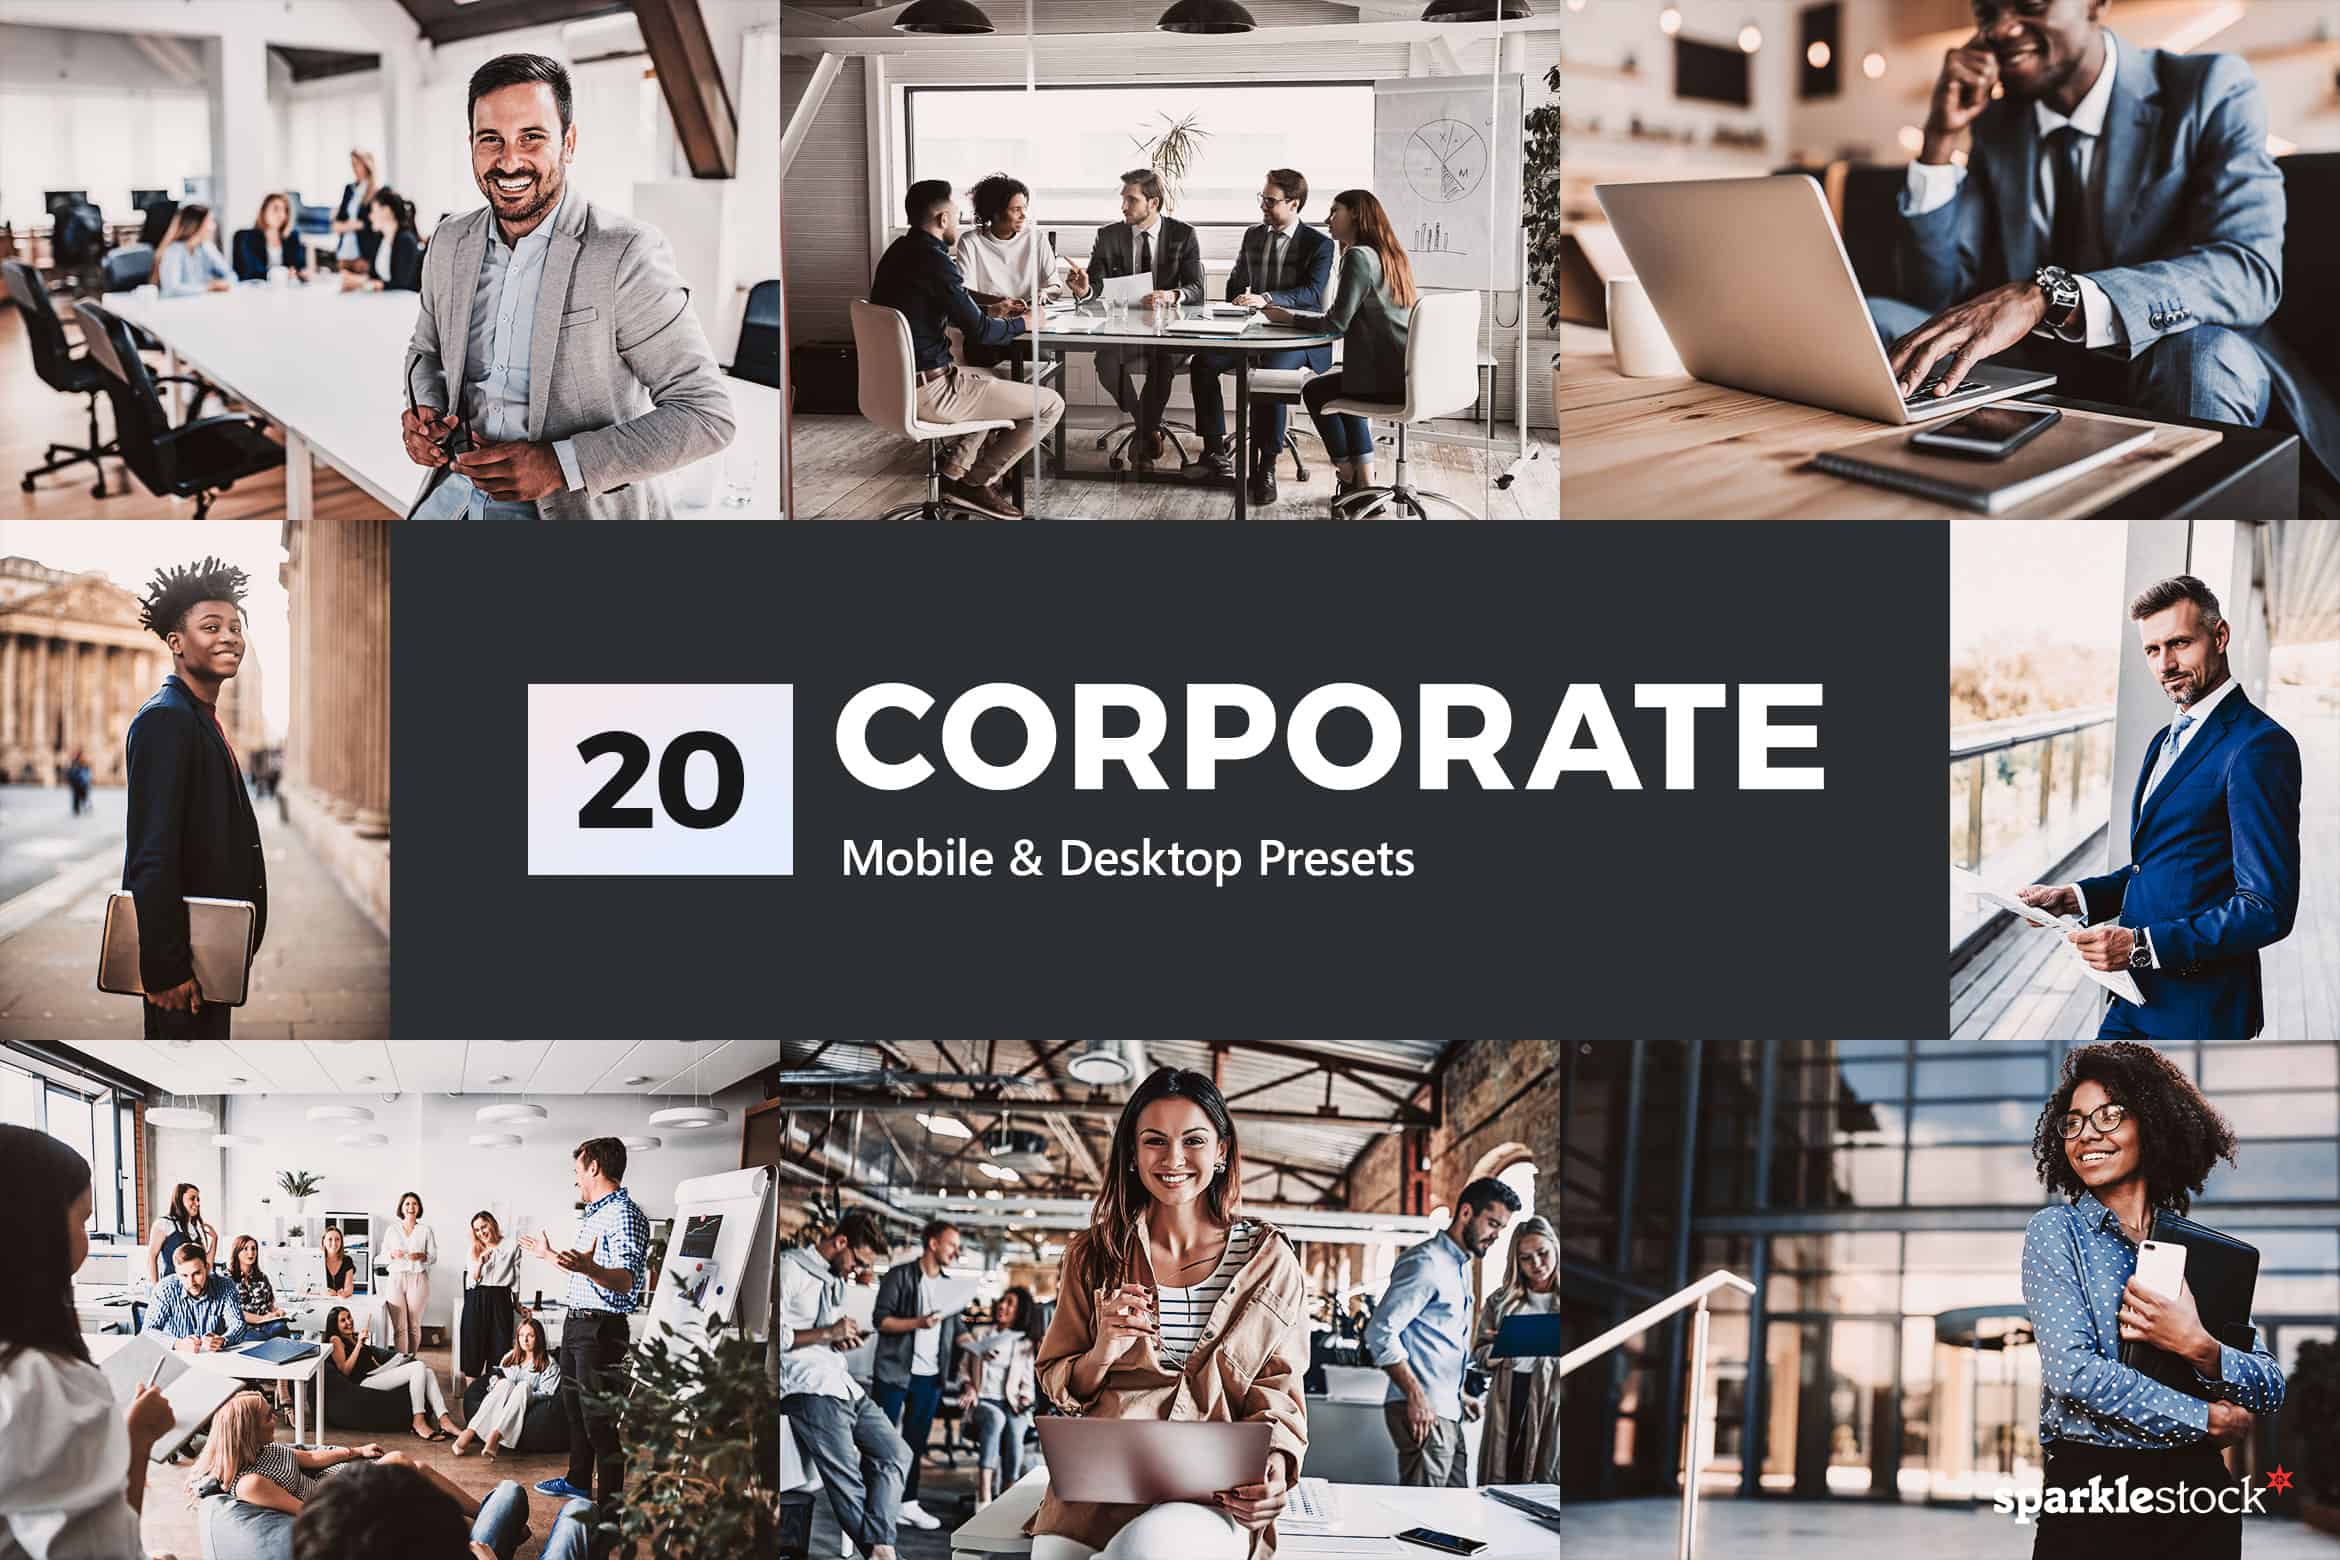 20 Corporate Lightroom Presets and LUTs